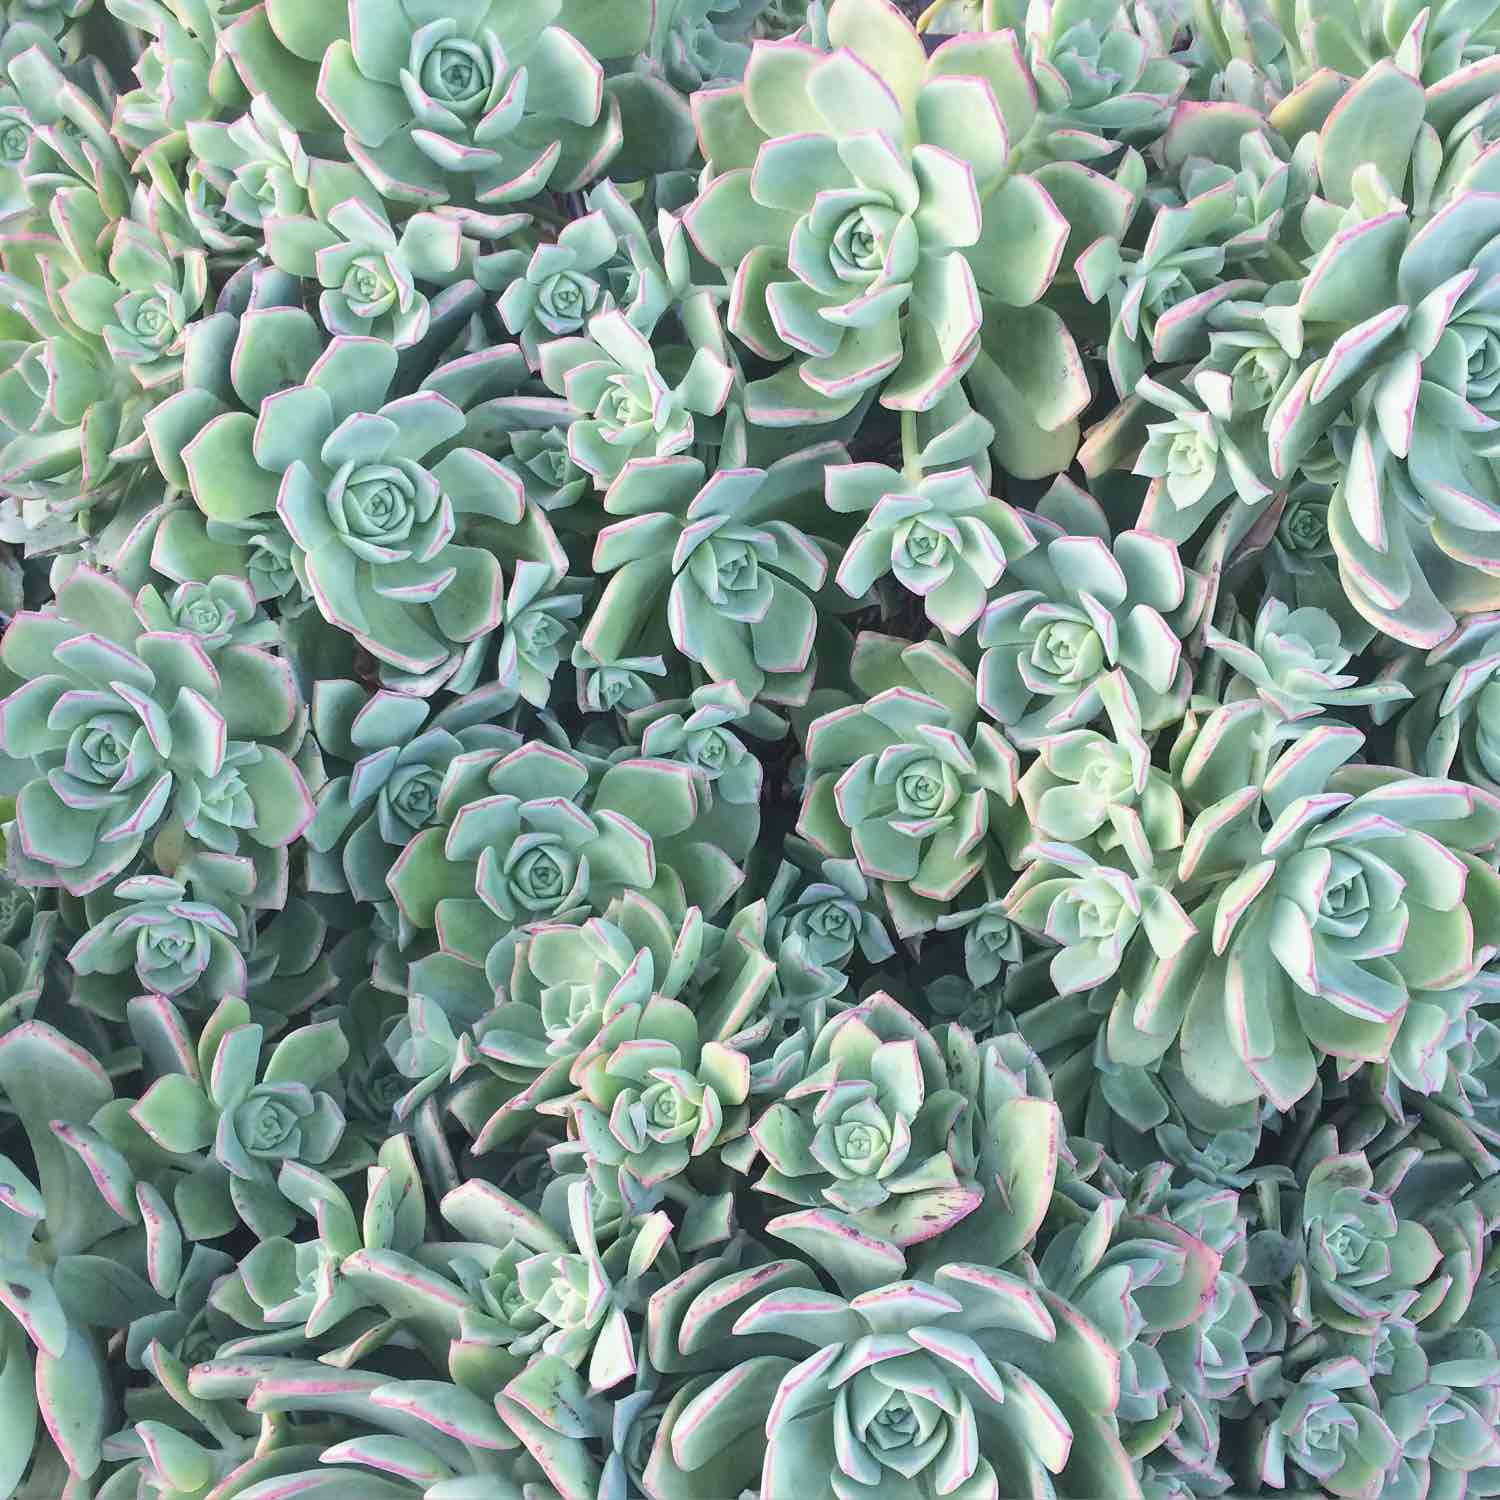 where to buy succulents in the bay area